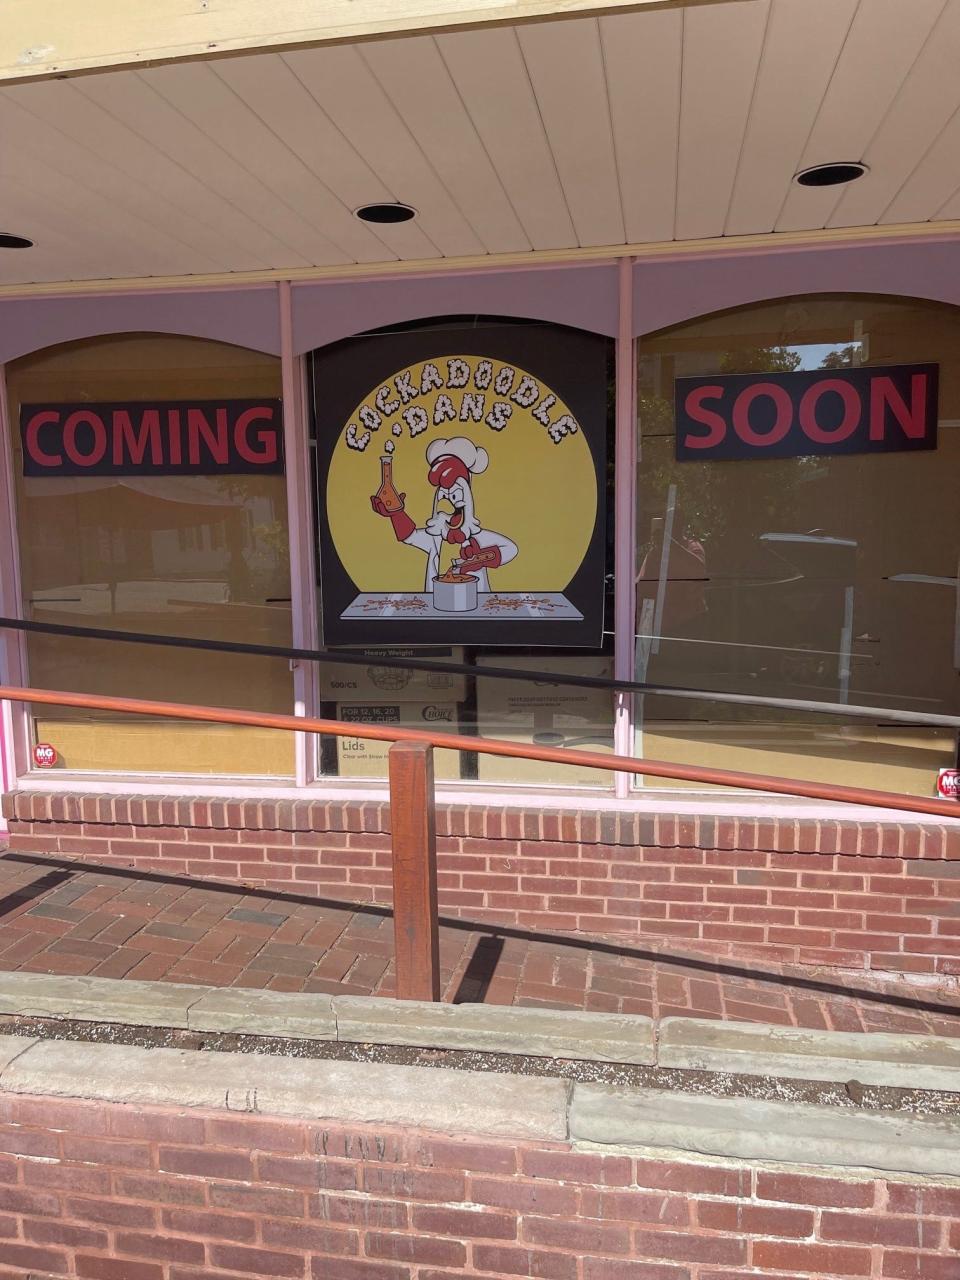 Cockadoodle Dan's is moving into its new digs in Moorestown after being in Palmyra for several years.